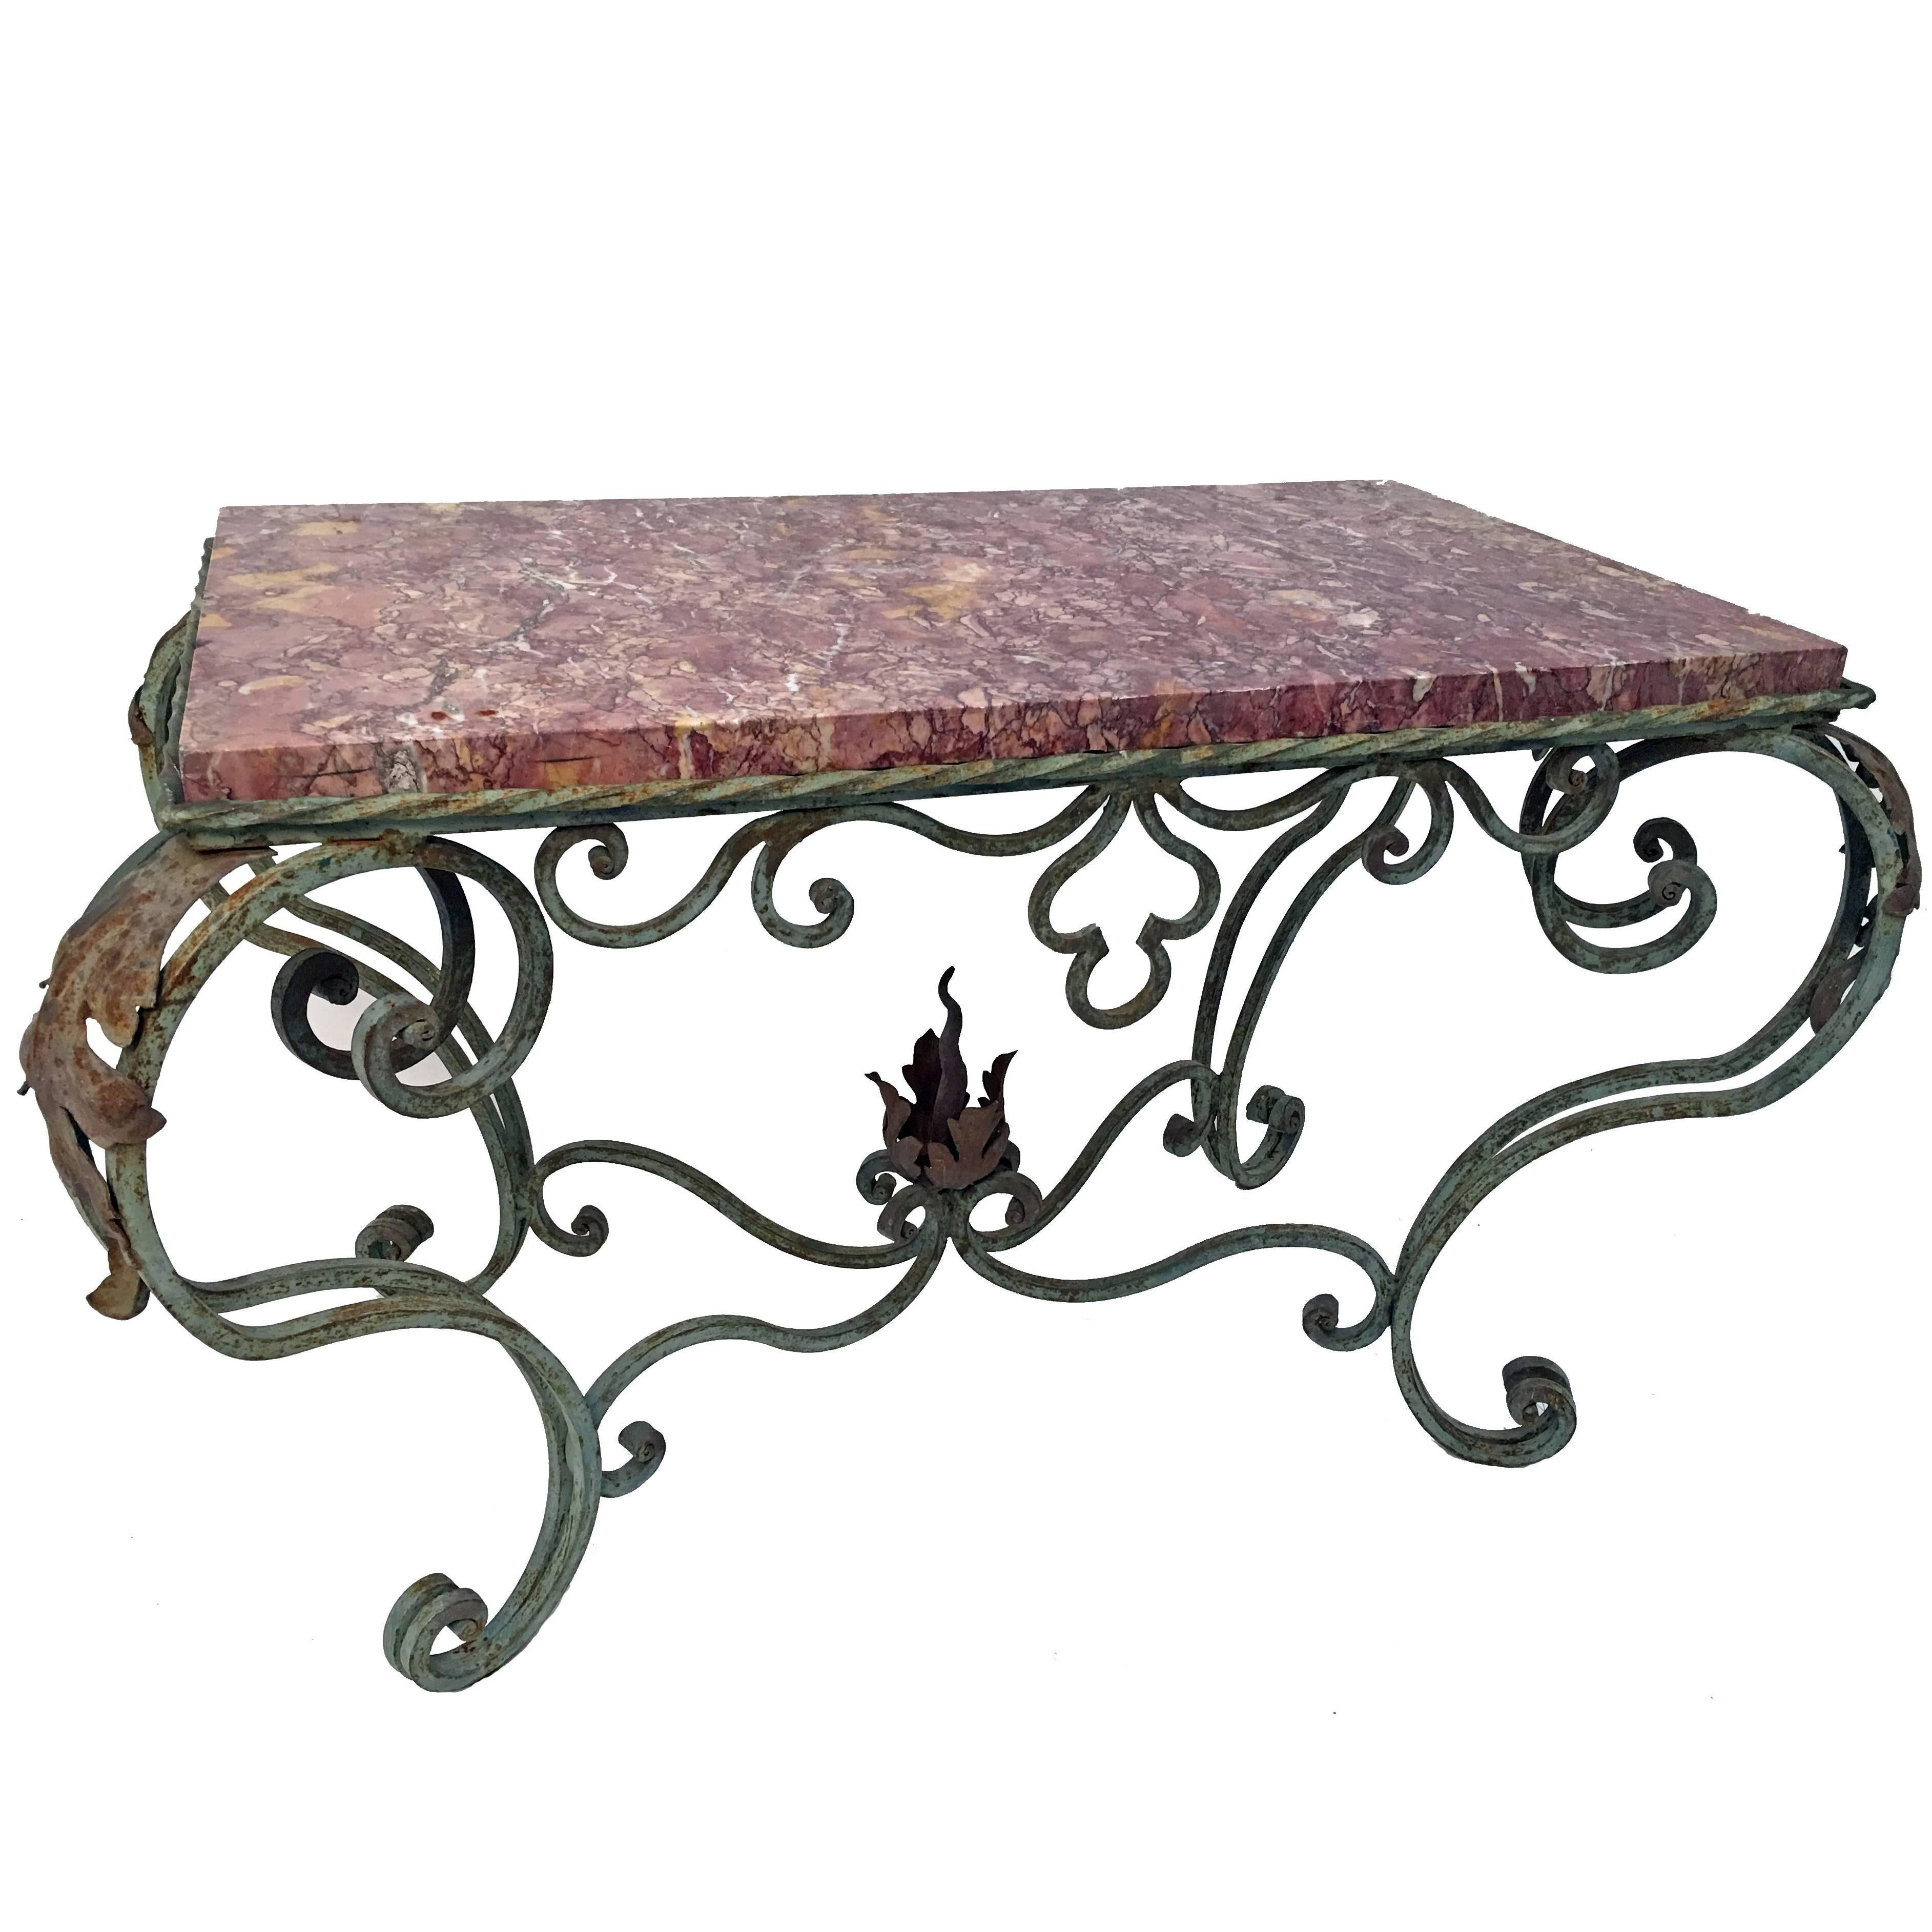 Green Painted Wrought Iron Table with Marble Top